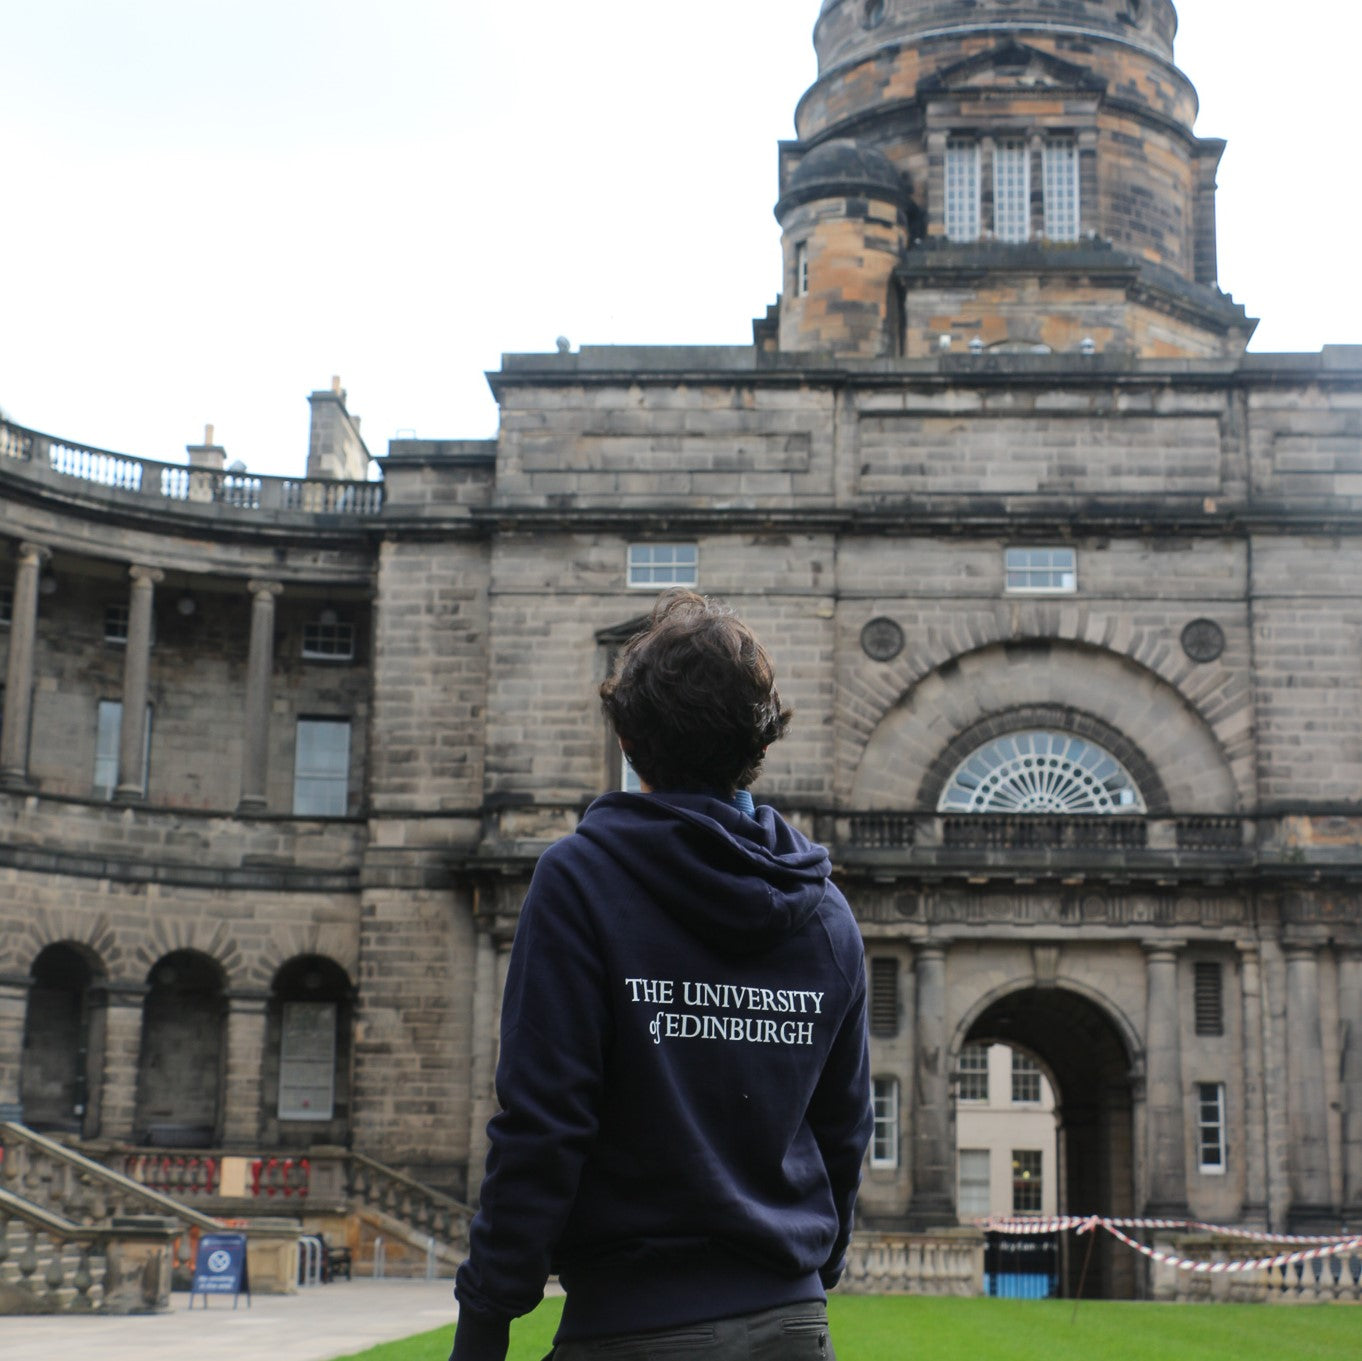 our model wears the premium embroidered zipped hoodie in navy, pictured from behind. The back features 'the university of edinburgh' in white print